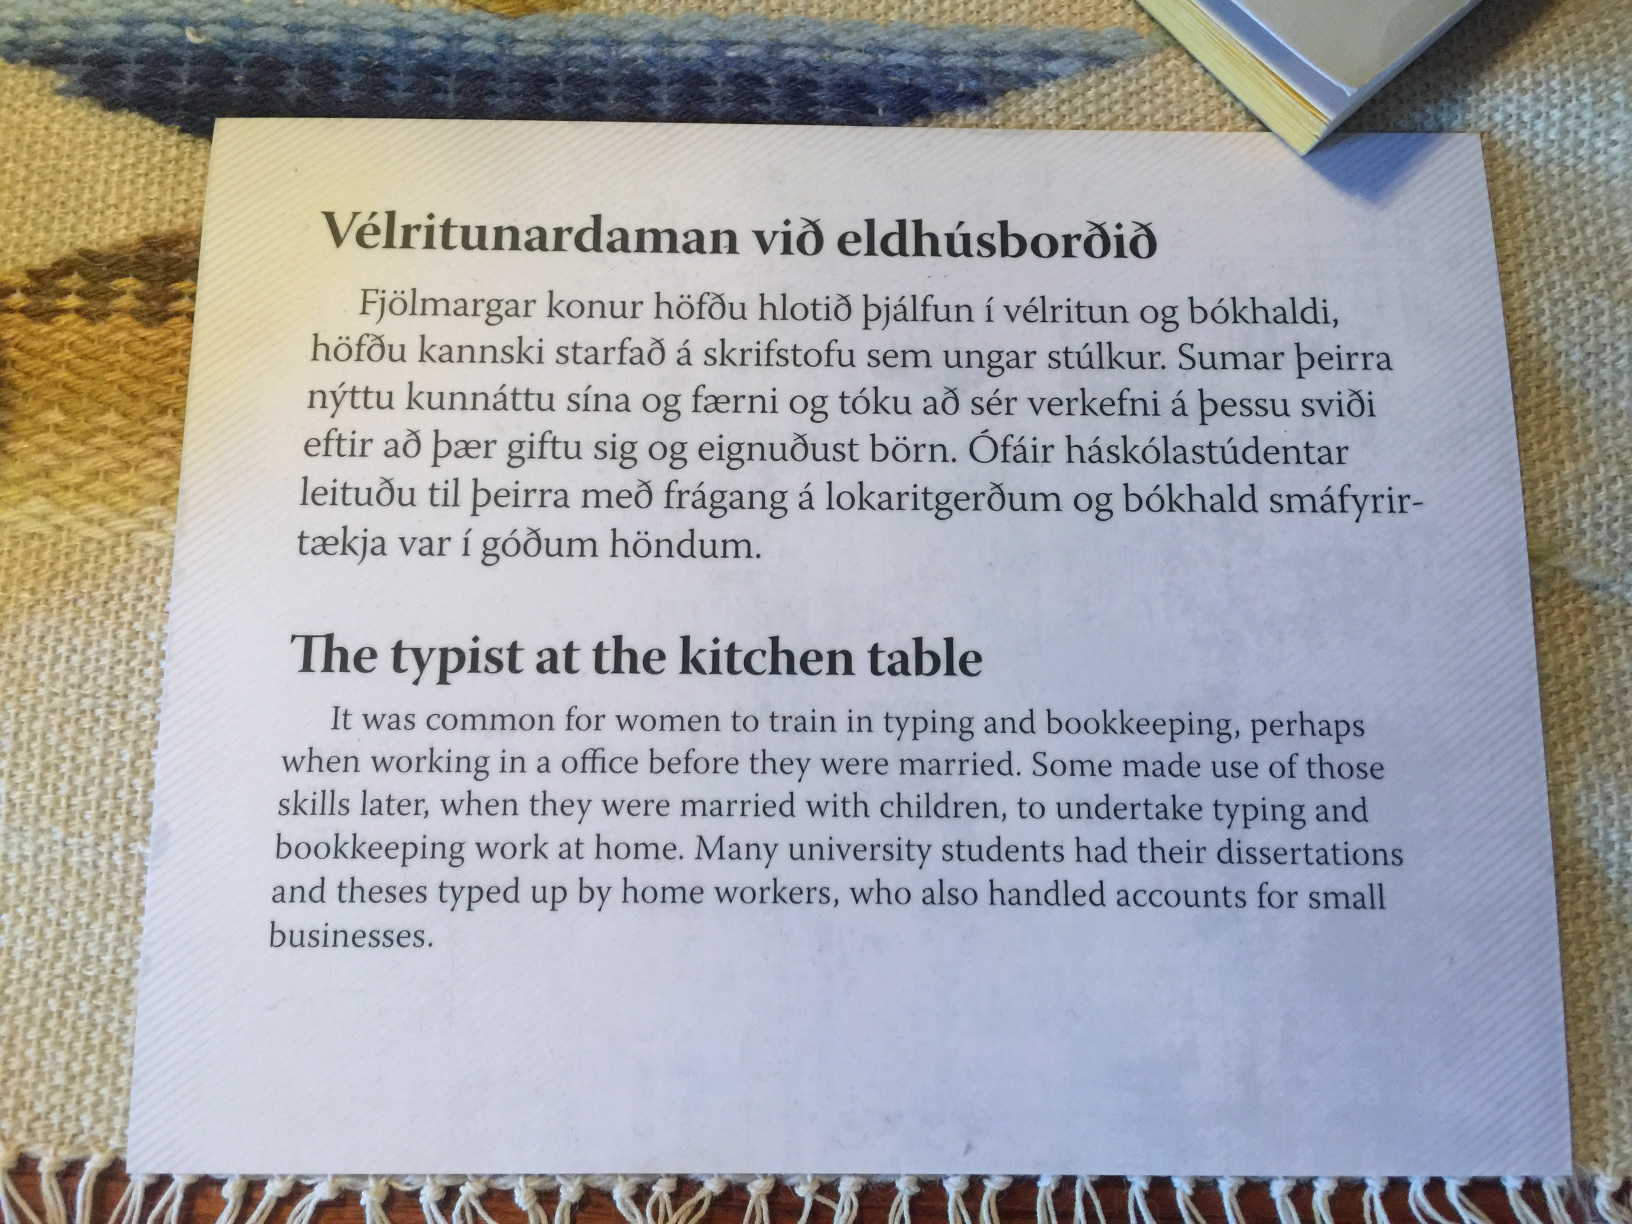 The typist at the kitchen table